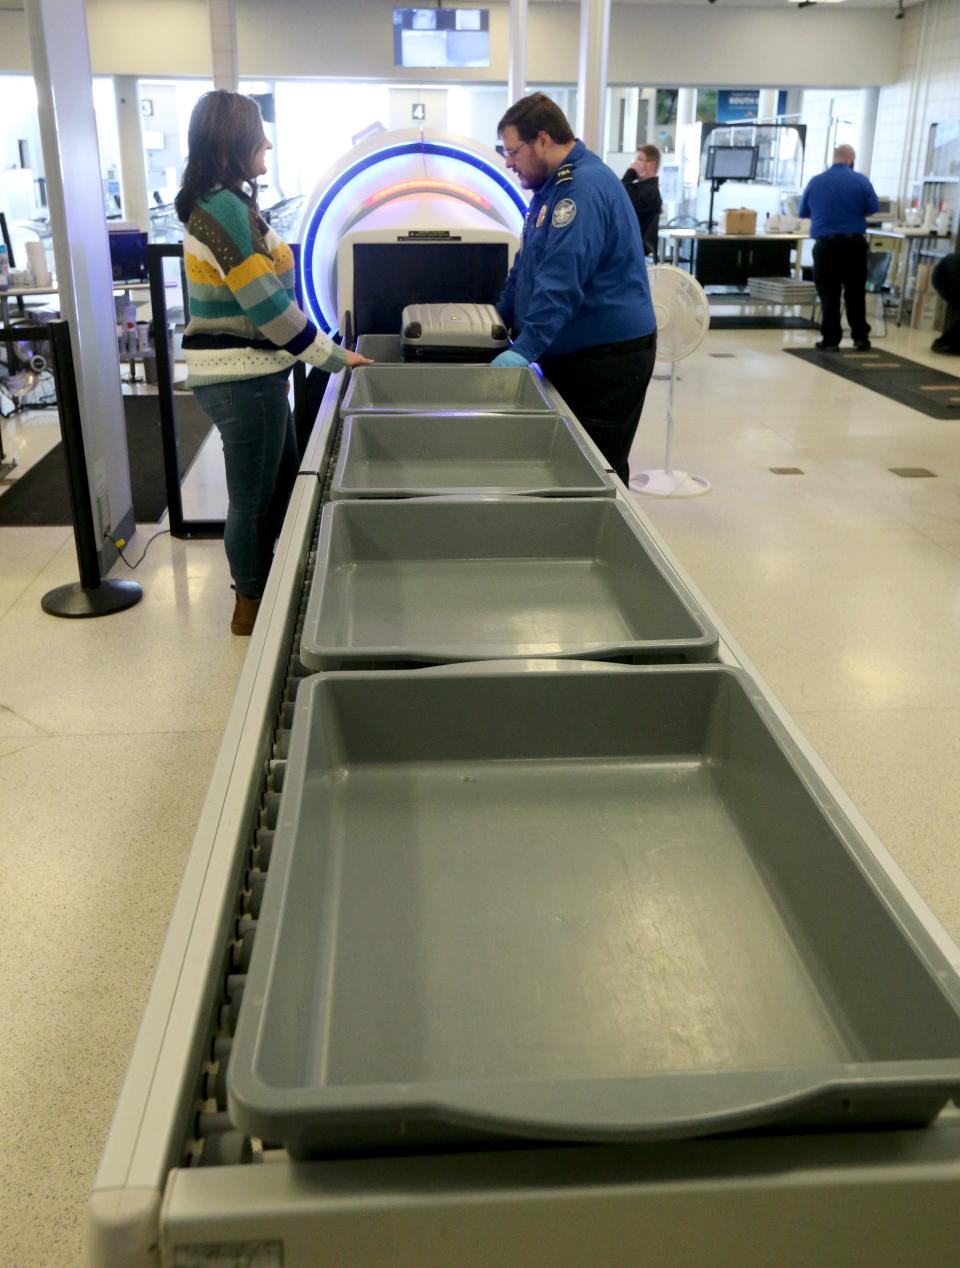 TSA agents do security checks for passengers at South Bend International Airport on Jan. 27, 2023.